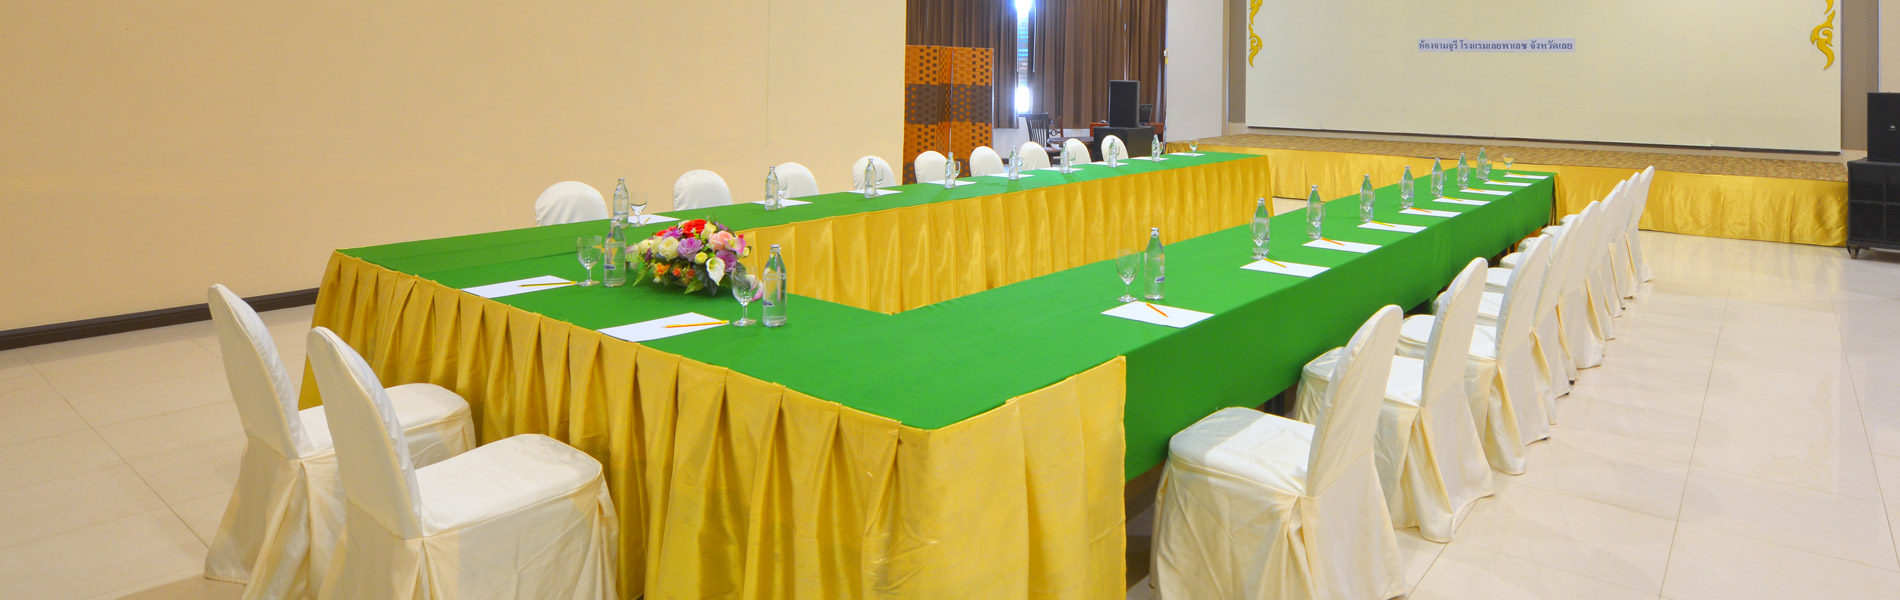 Function Rooms Facilities - Loei Palace Hotel